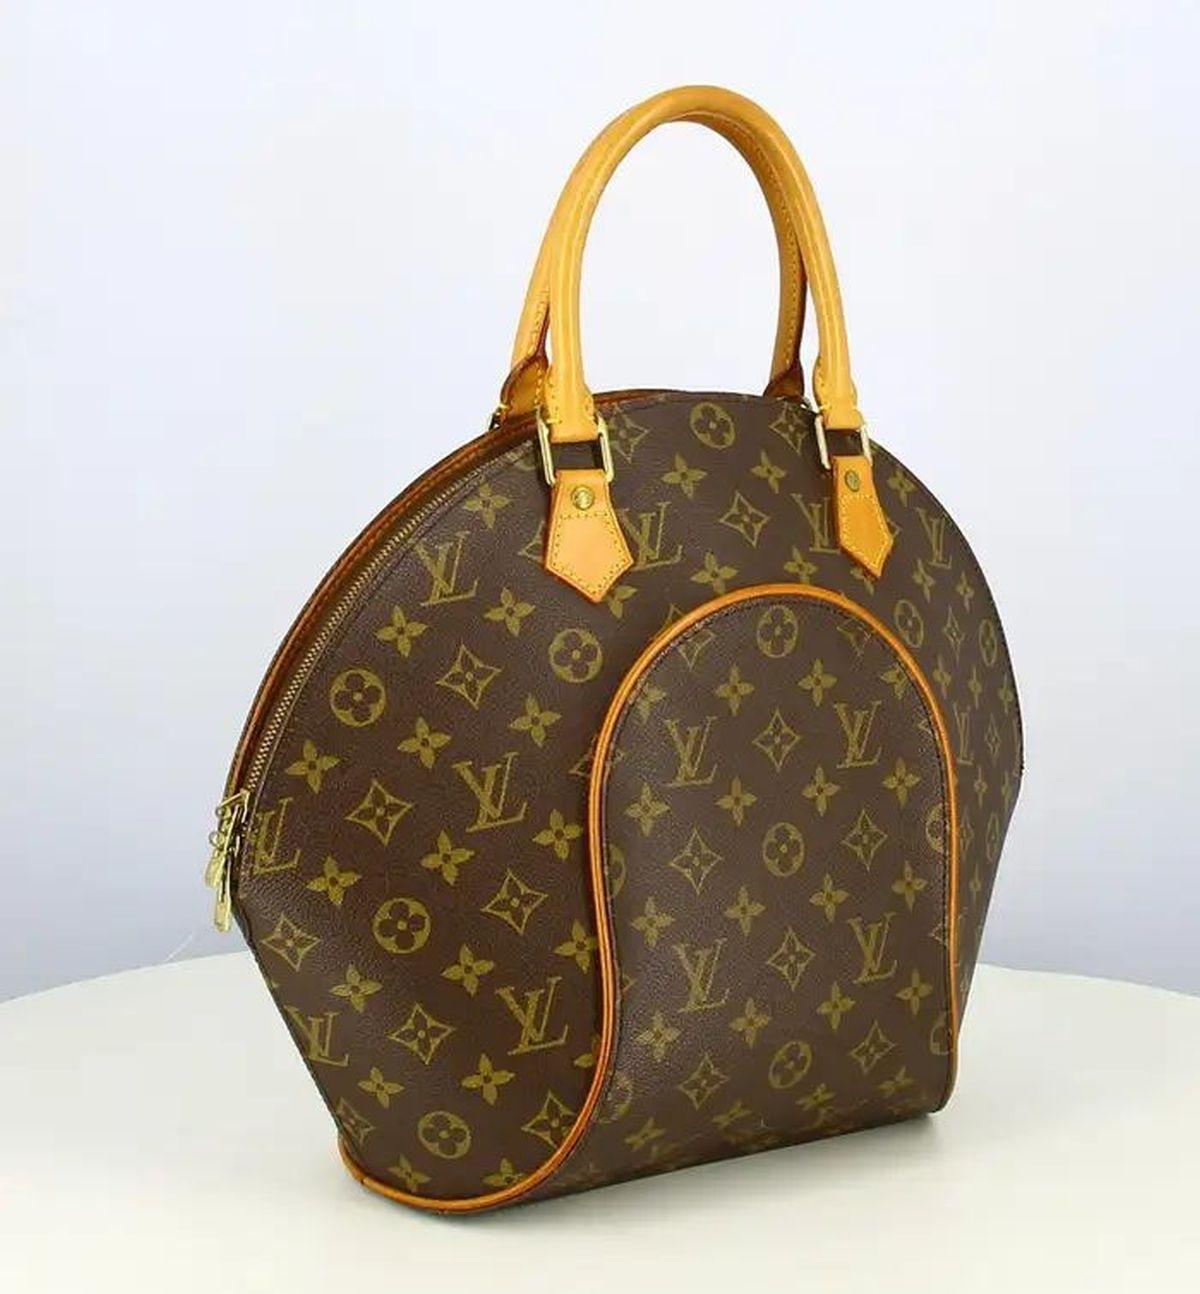 Simply Beautiful! Vintage Iconic Louis Vuitton Designer 1998 MM Monogram Ellipse. Vintage crafted Traditional Louis Vuitton Monogram Toile Canvas Bowling design Handbag. Featuring Vachetta cowhide Leather with piping, strong durable handles with